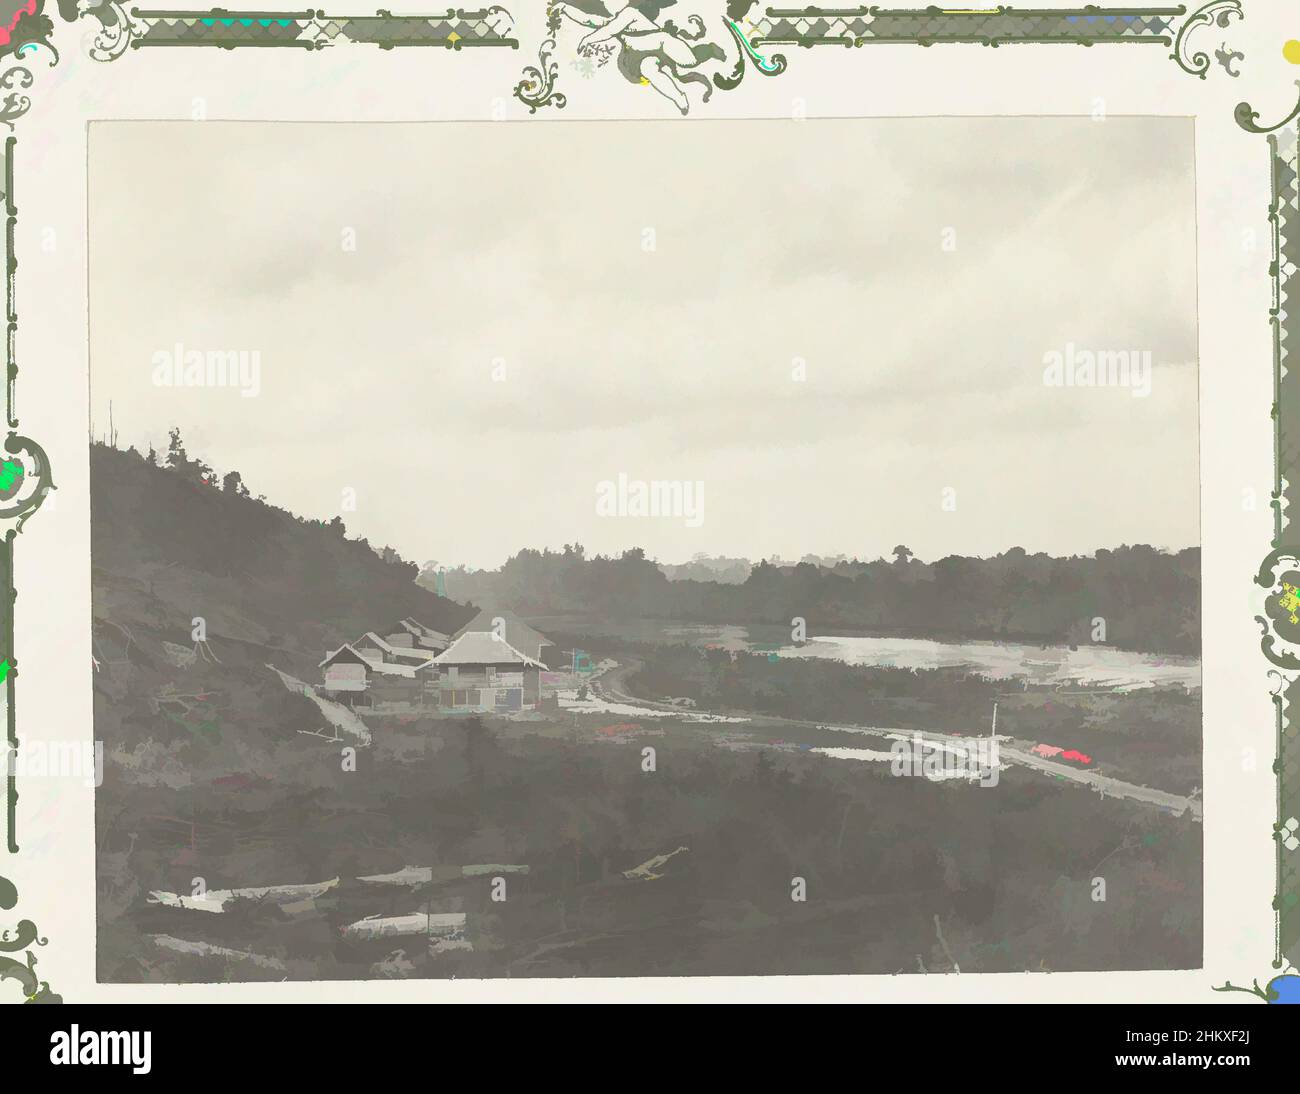 Art inspired by Site with cleared trees, Site with cleared trees along a river with a road leading to some buildings. Photo in the photo album on oil extraction in Borneo by the Royal Dutch Petroleum Company (KNPM) in the years 1903-1907., Kalimantan, 1903 - 1907, paper, gelatin silver, Classic works modernized by Artotop with a splash of modernity. Shapes, color and value, eye-catching visual impact on art. Emotions through freedom of artworks in a contemporary way. A timeless message pursuing a wildly creative new direction. Artists turning to the digital medium and creating the Artotop NFT Stock Photo